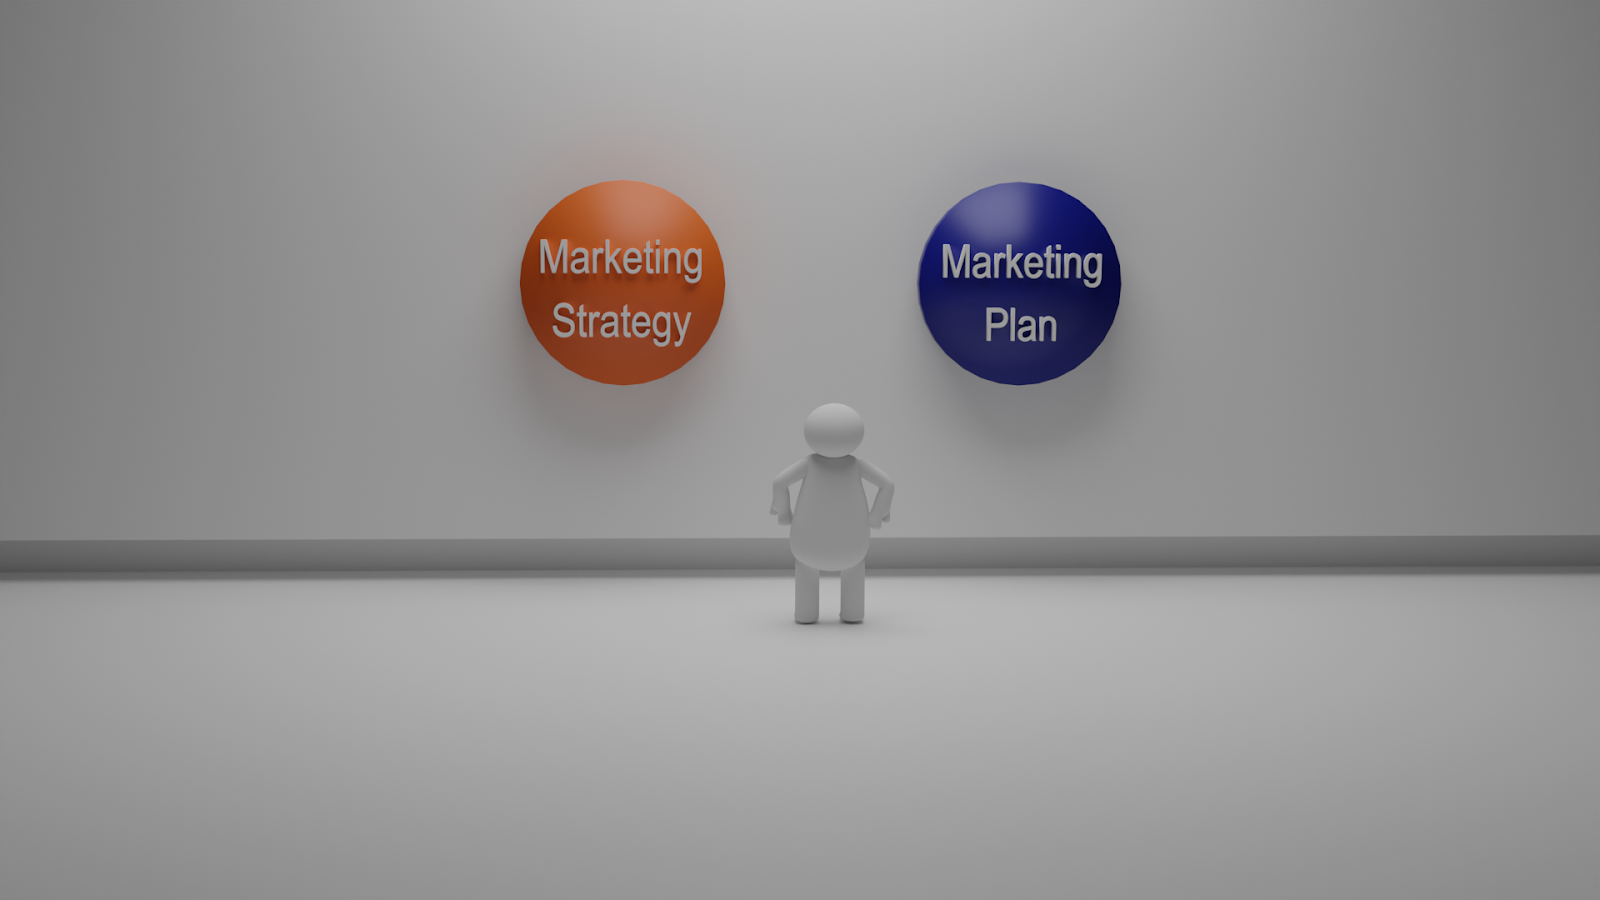 A recent survey suggests that businesses that employ a marketing strategy are 313% more likely to be successful.